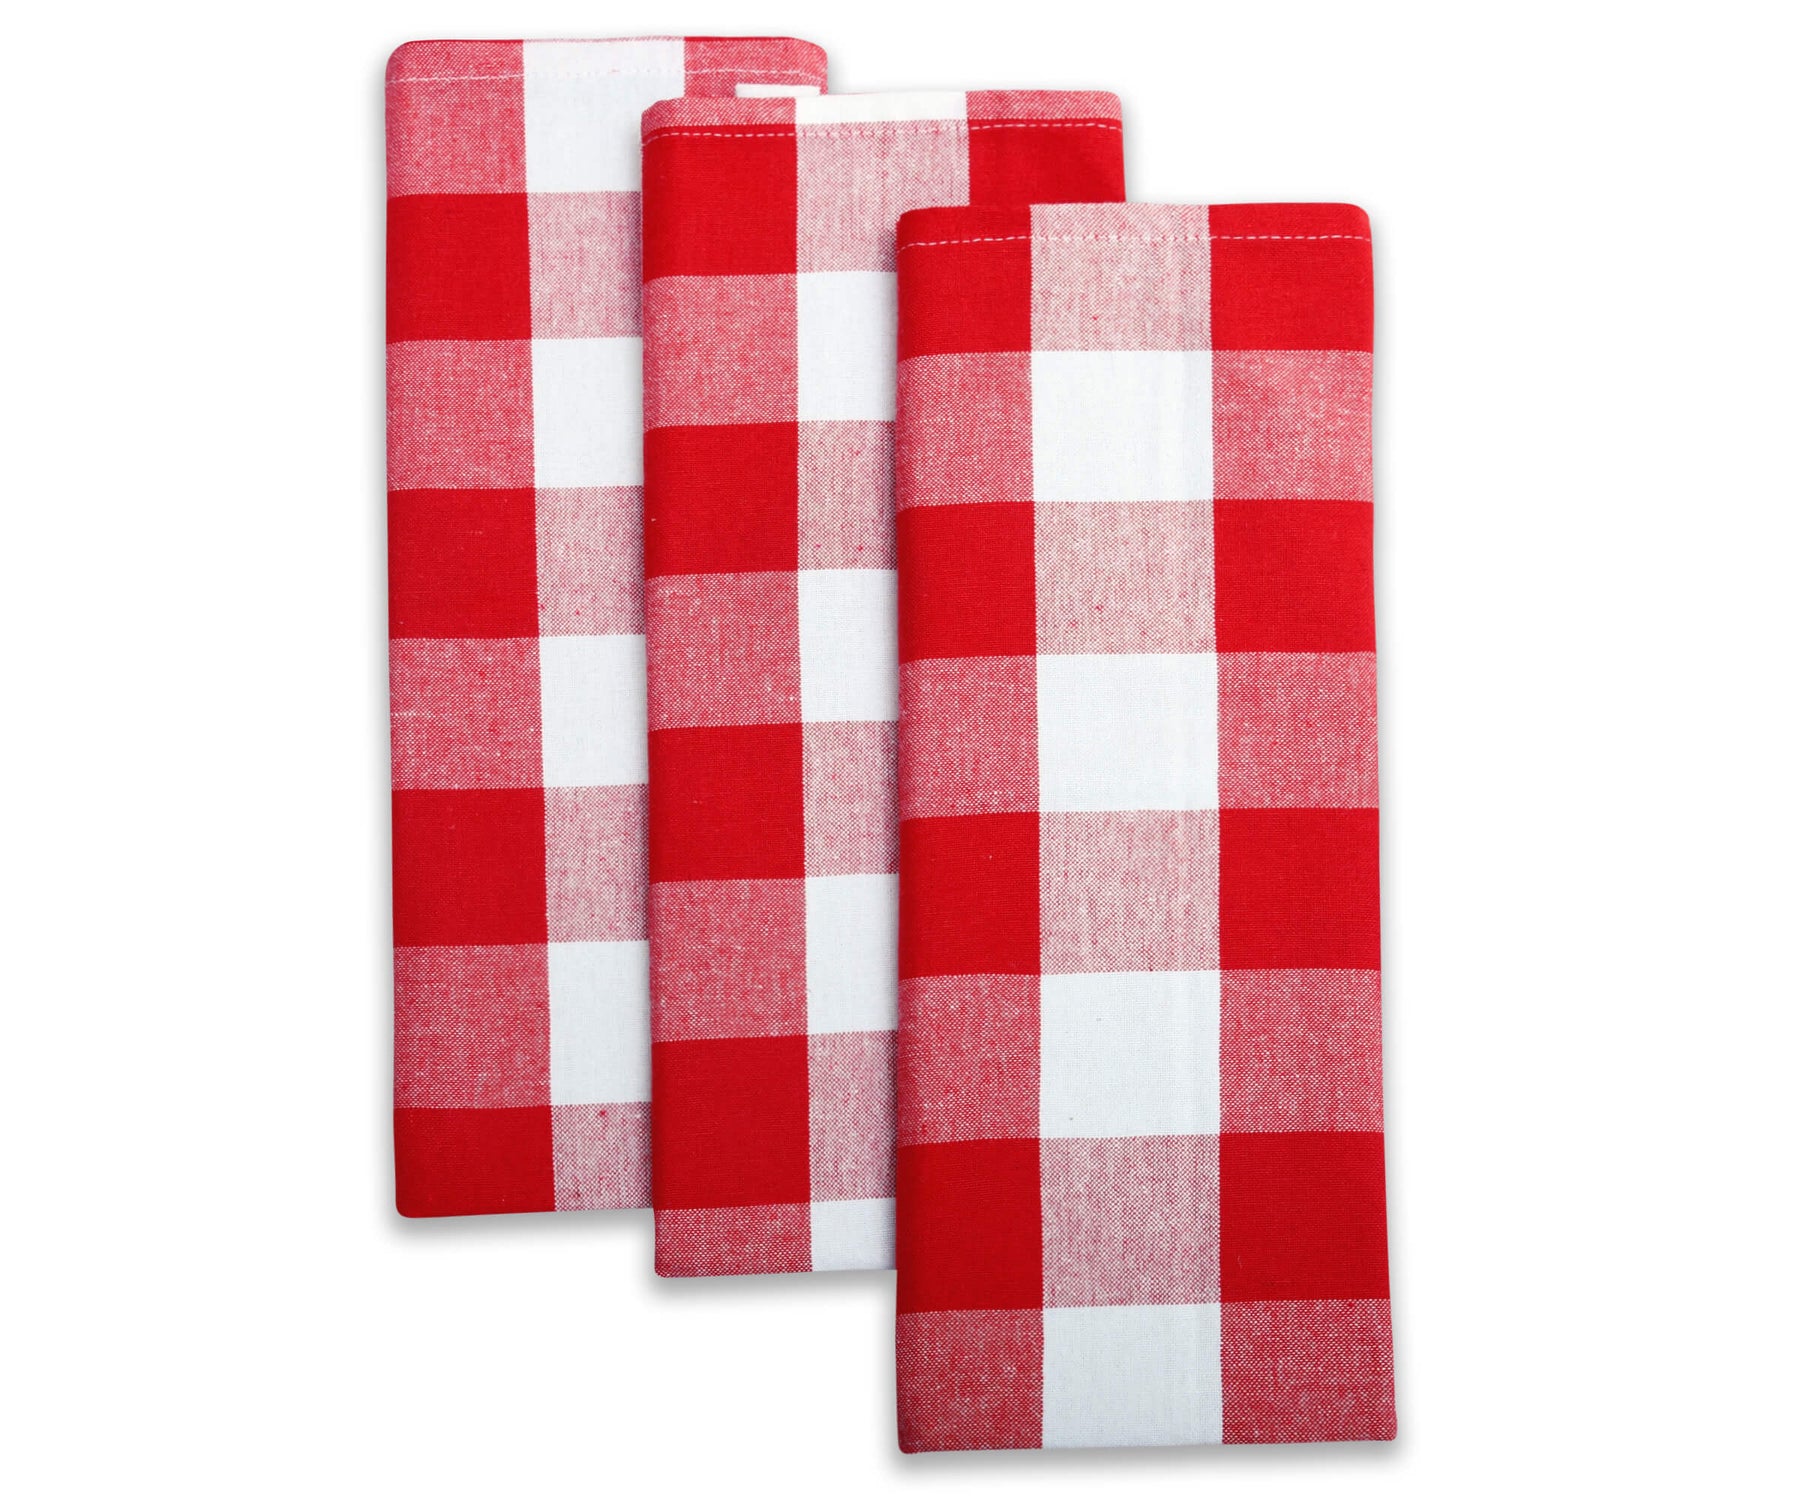 fillURbasket Burgundy Farmhouse Kitchen Towels Set of 3 Striped Buffalo  Checked Plaid Dish Towels Red and Tan Towels for Decor Dishing Drying  Cotton